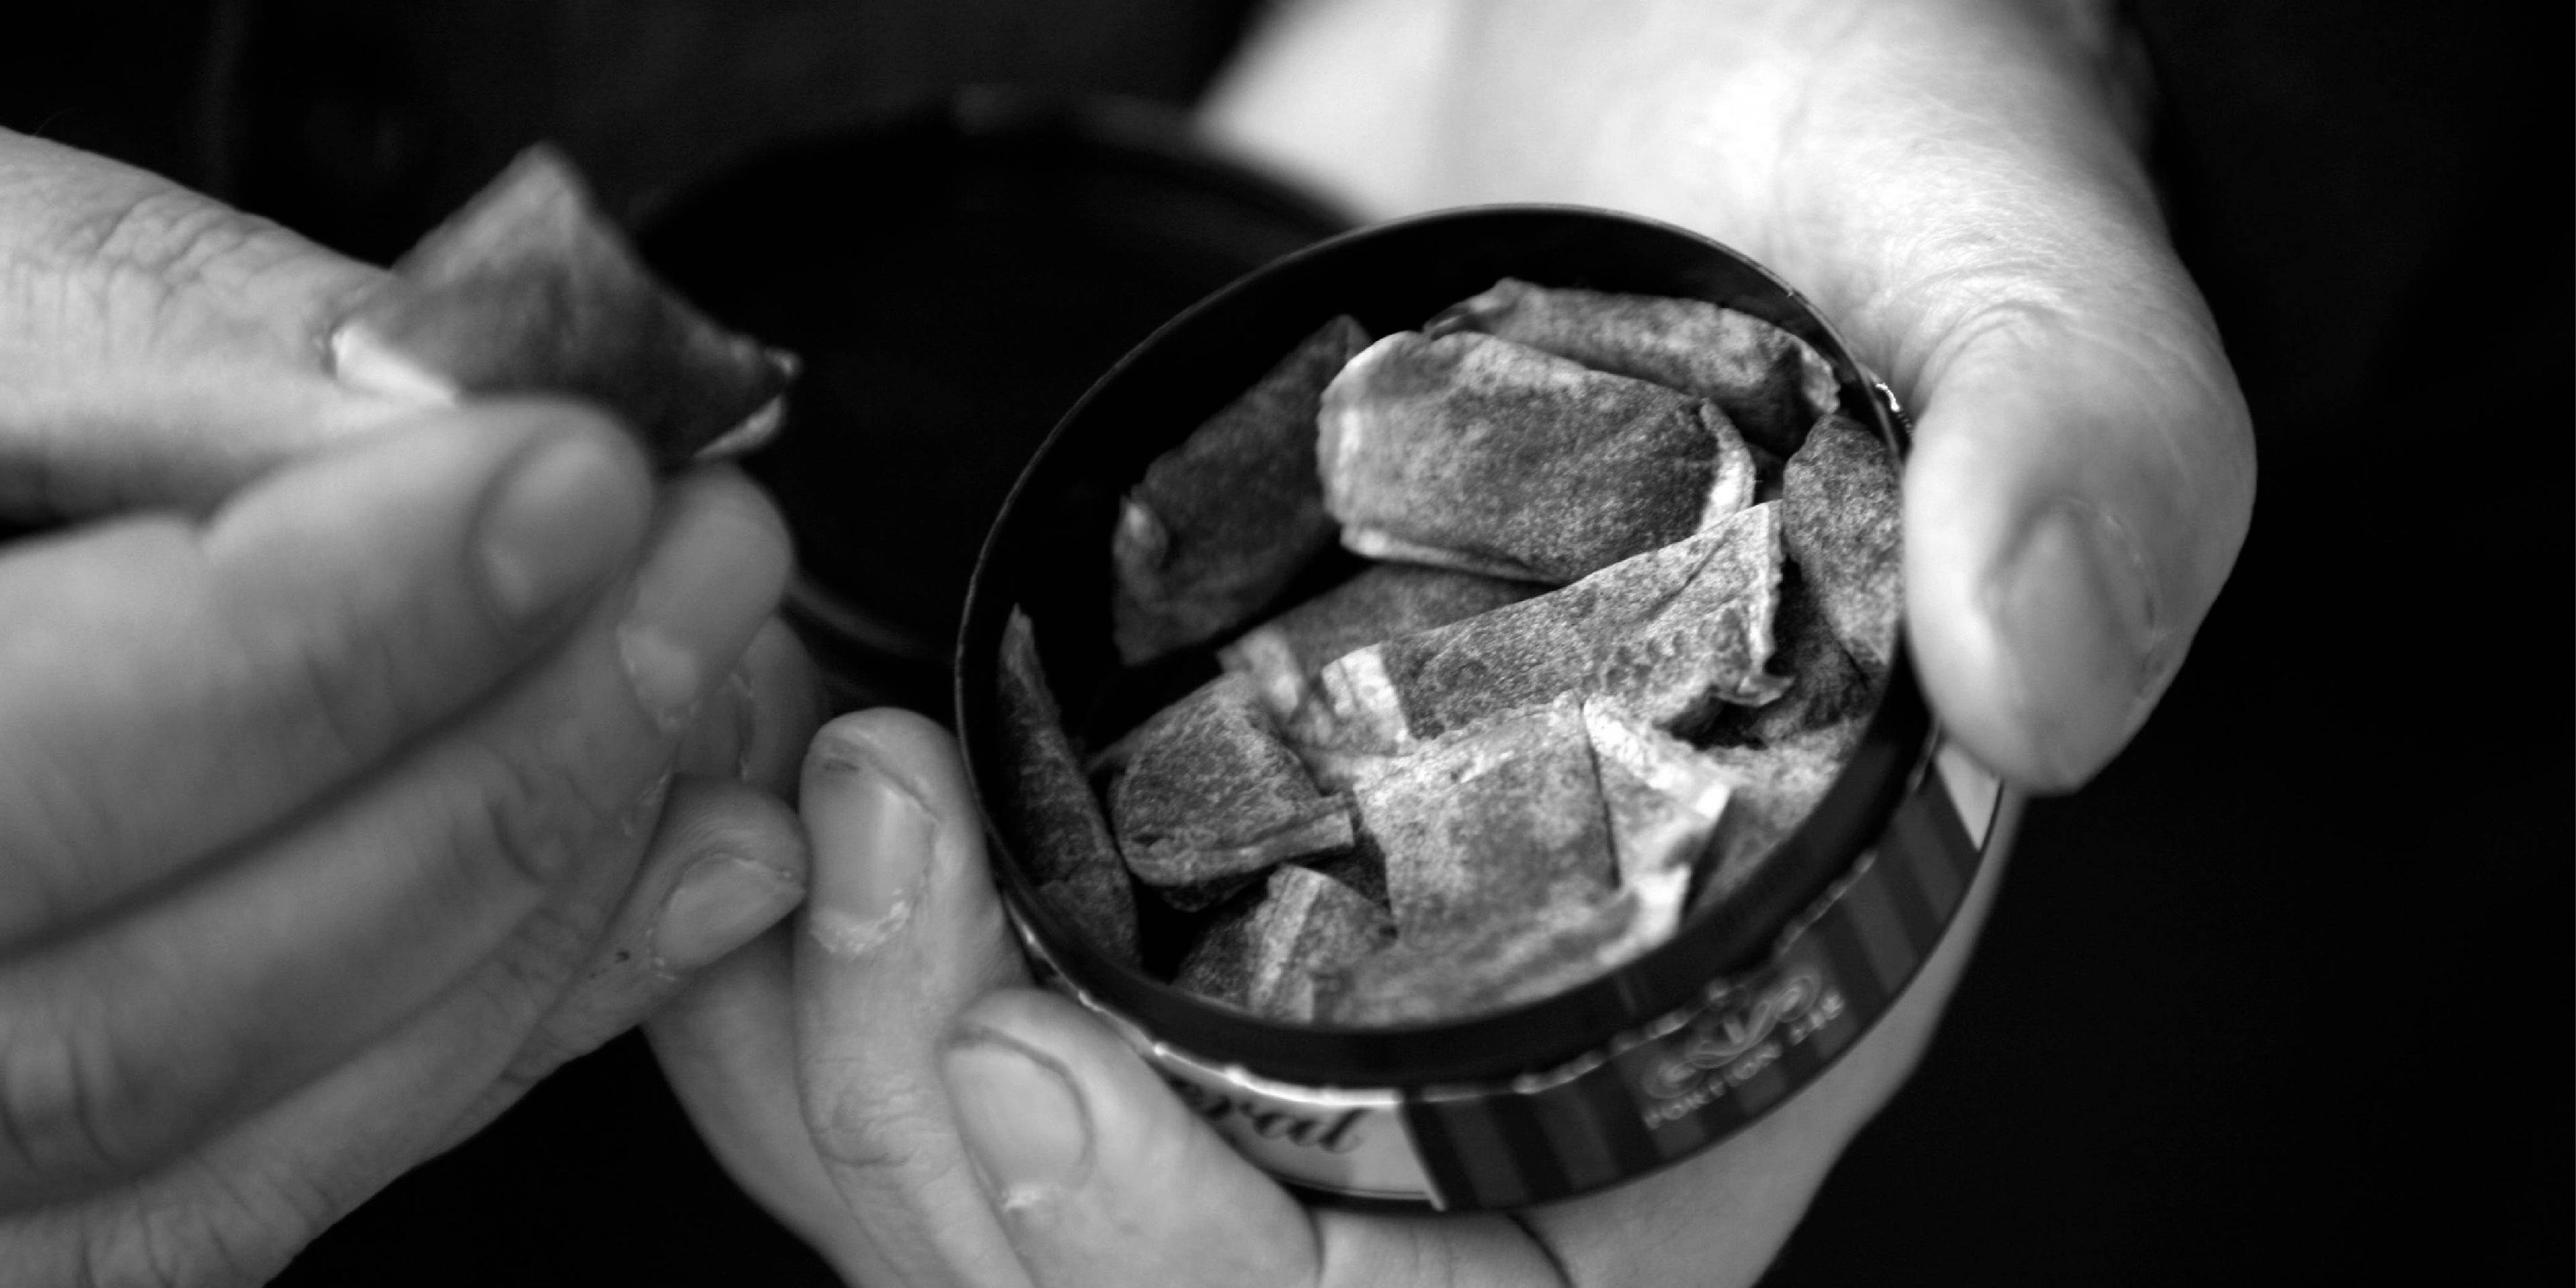 What Was Snuff In The 1800s?